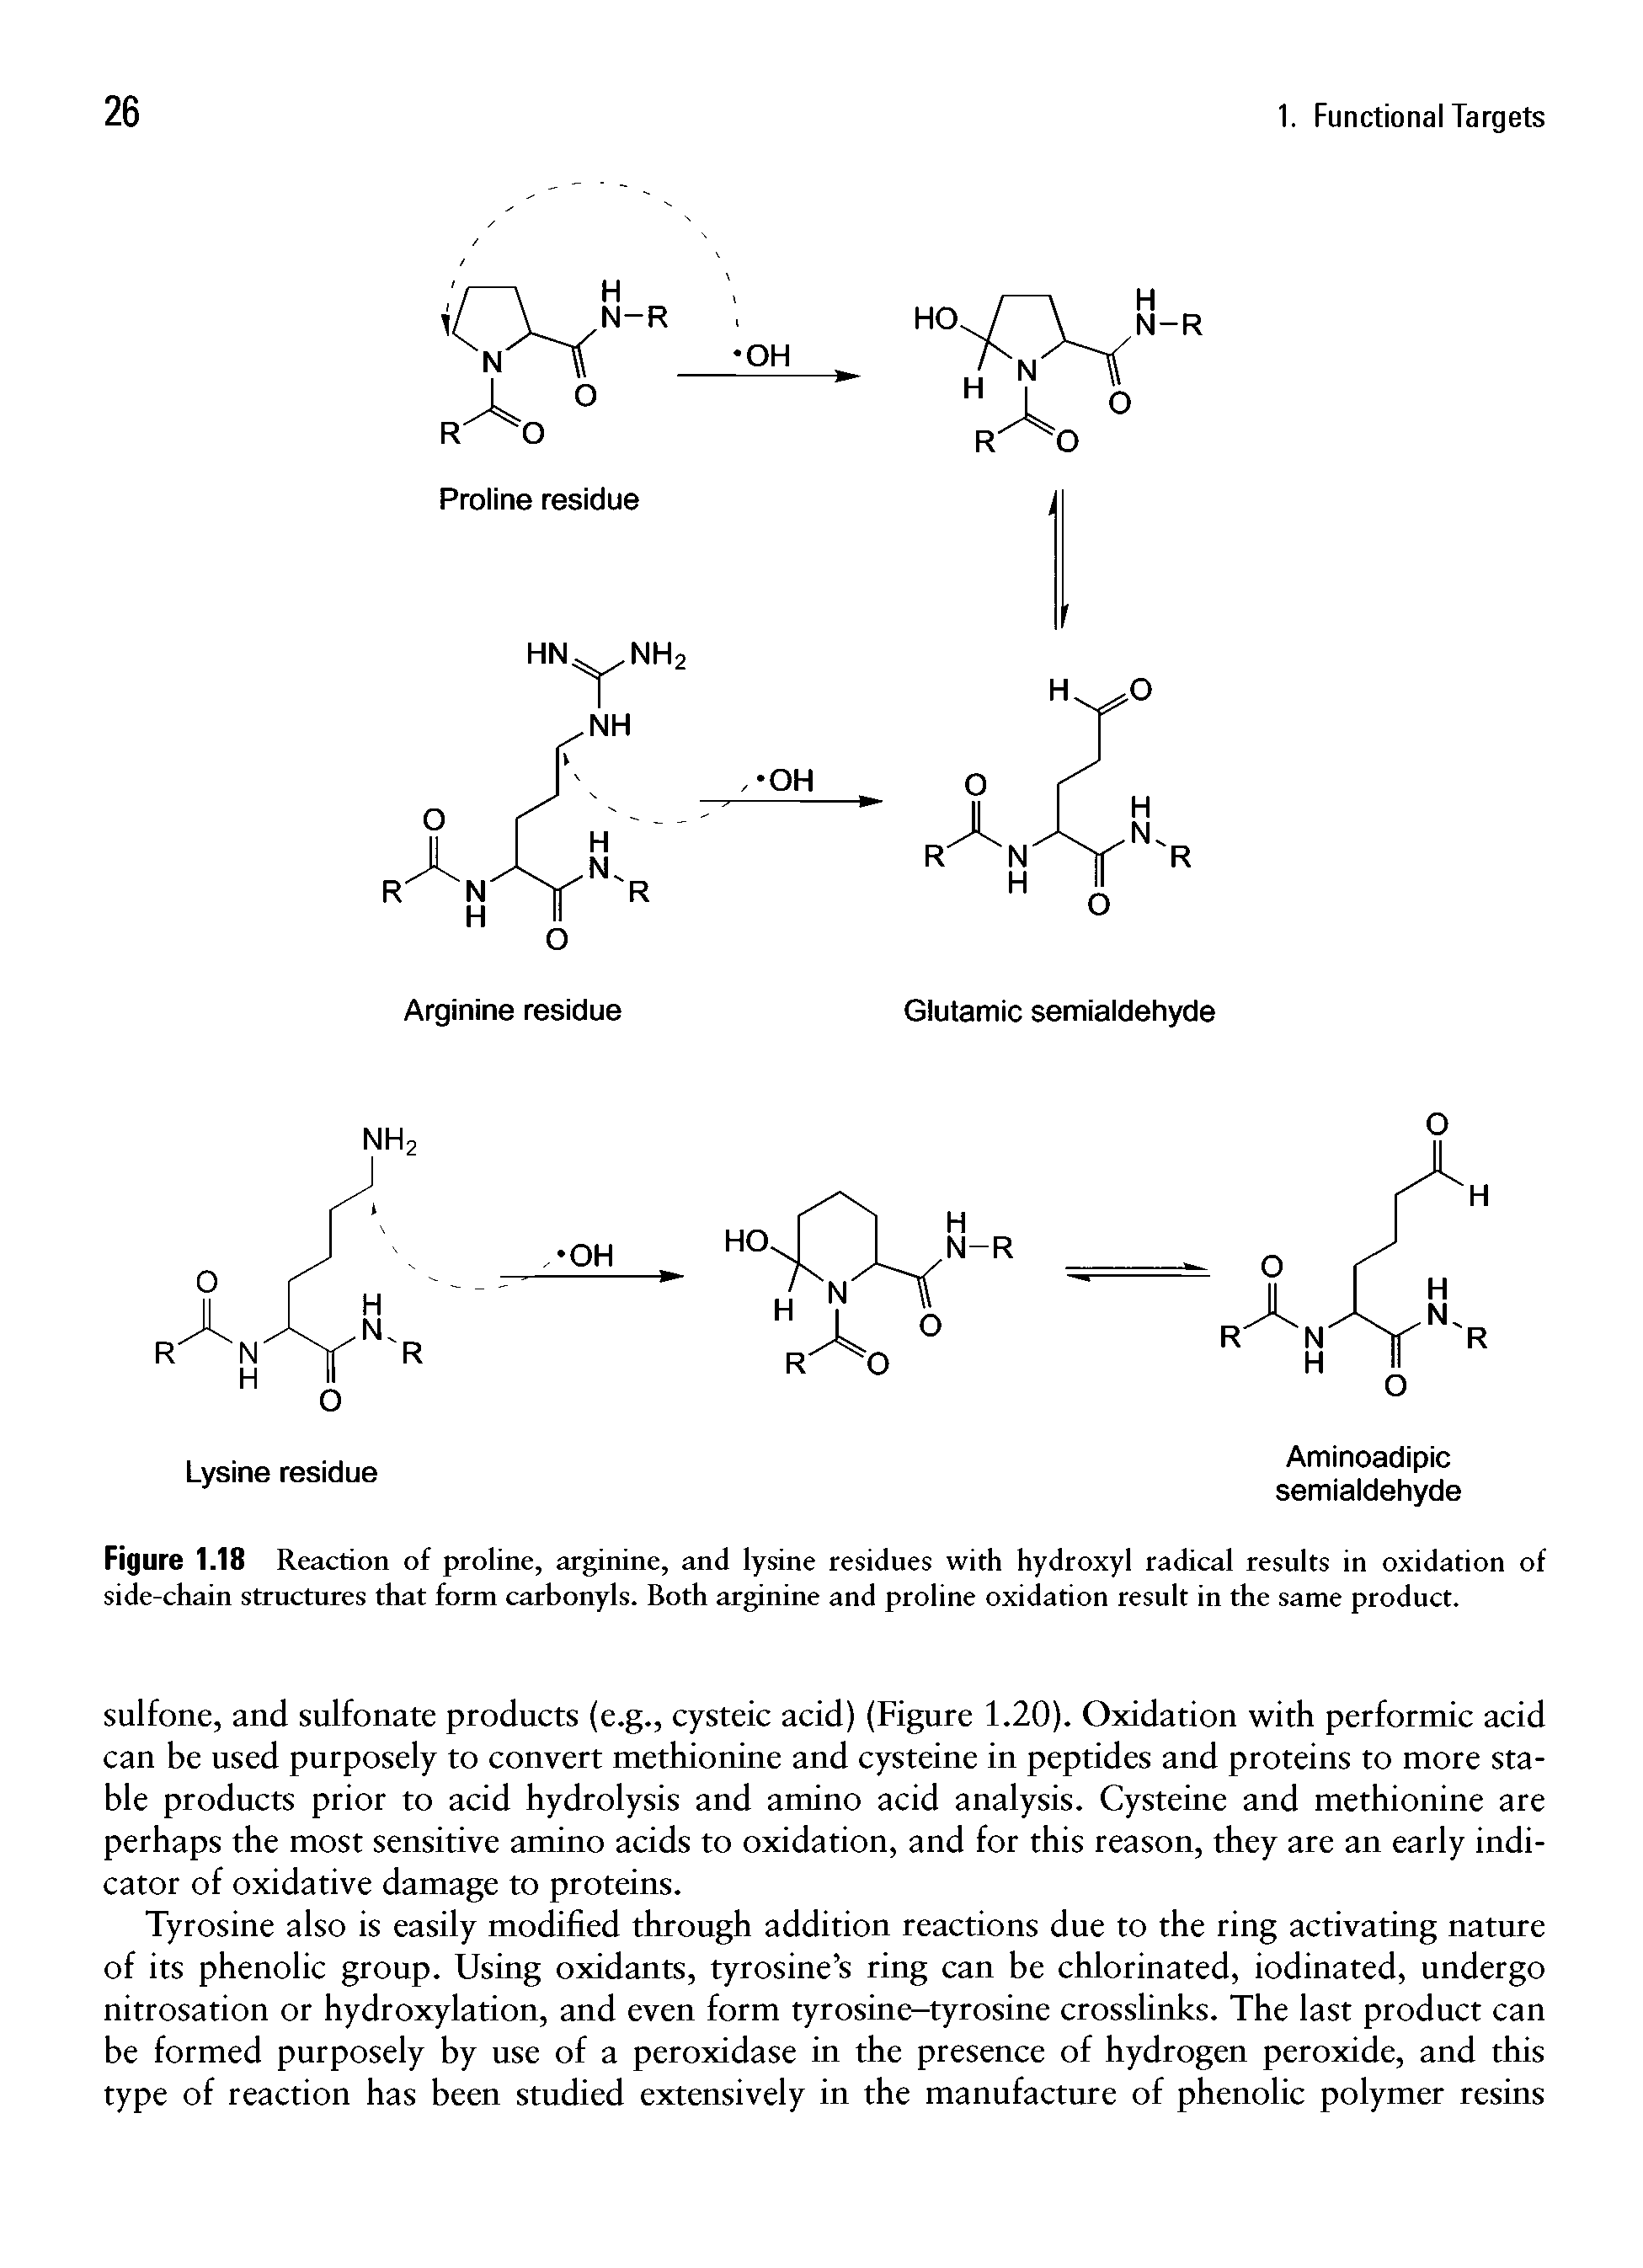 Figure 1.18 Reaction of proline, arginine, and lysine residues with hydroxyl radical results in oxidation of side-chain structures that form carbonyls. Both arginine and proline oxidation result in the same product.